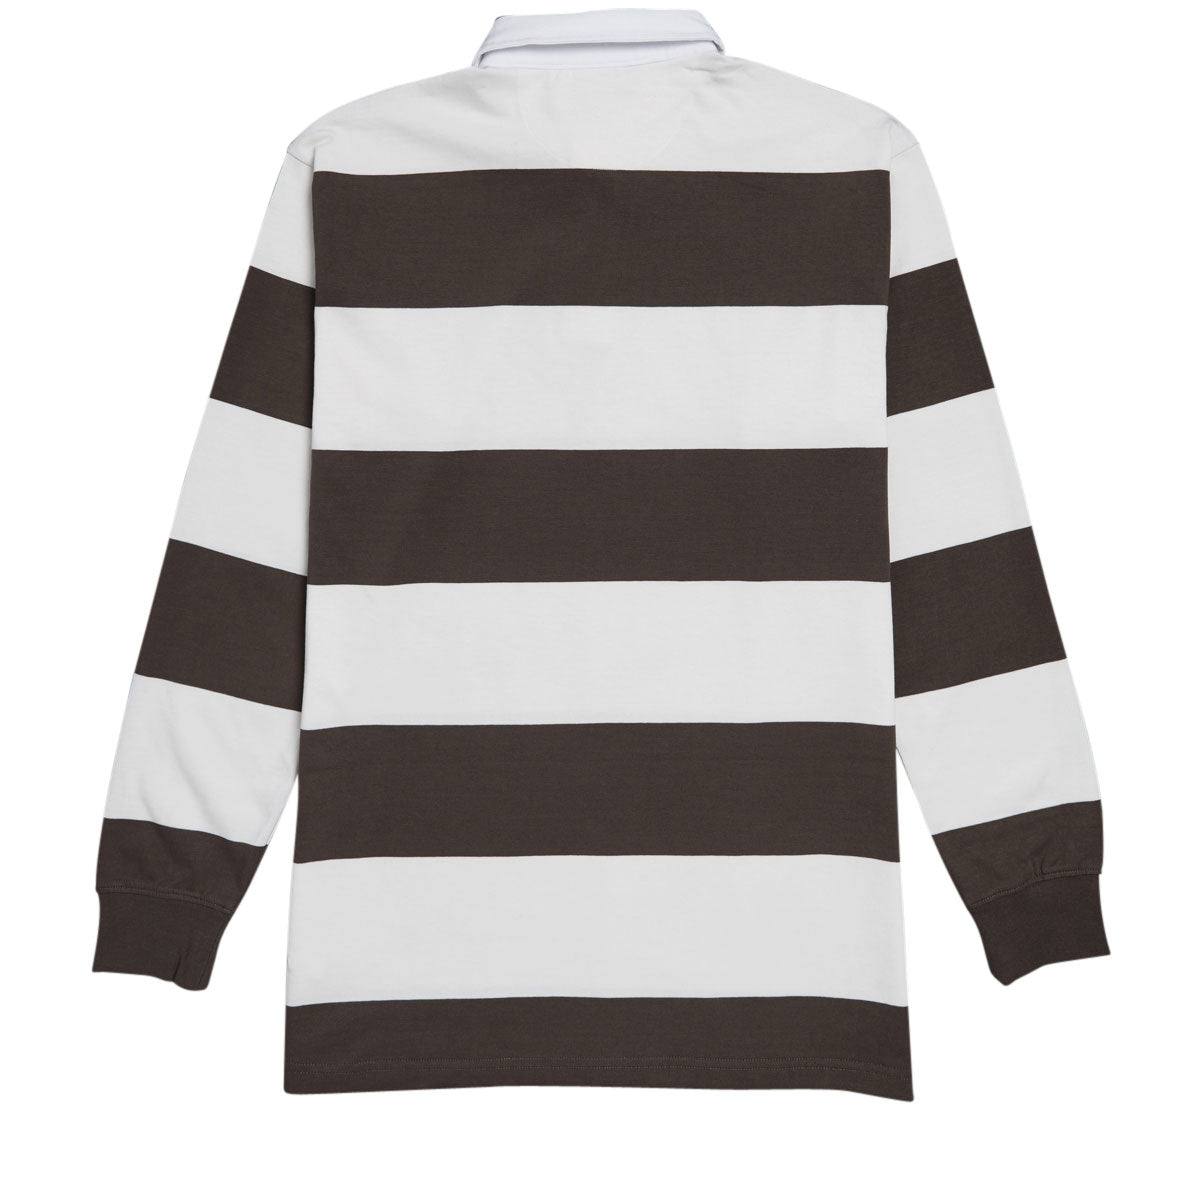 Girl Serif Rugby Jersey - Natural/Brown image 2